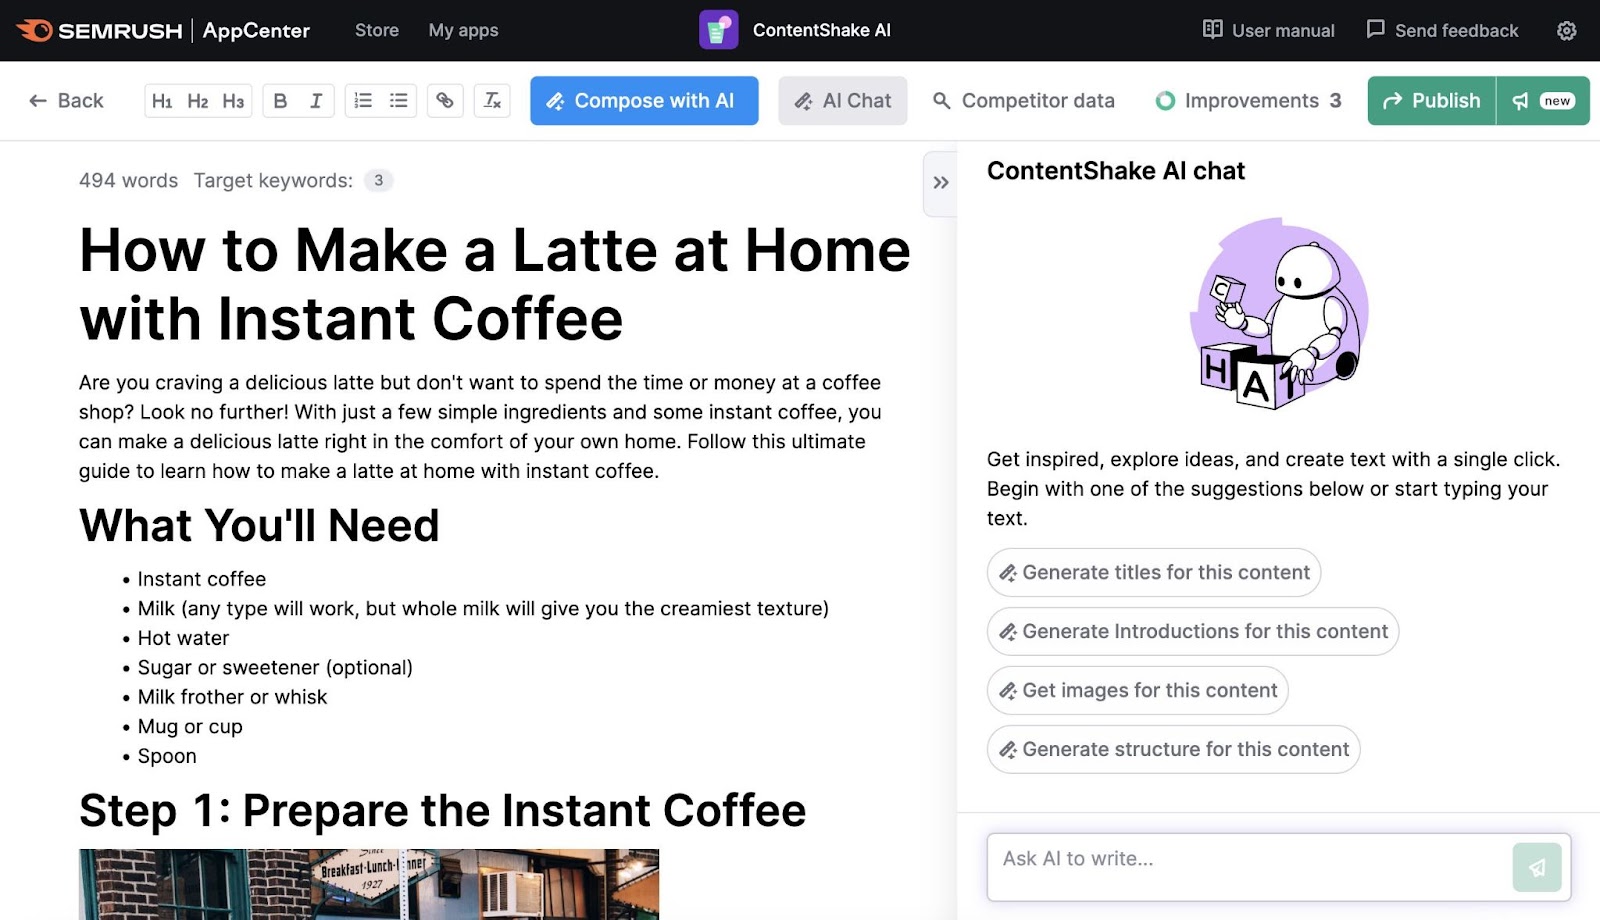 An article on how to make a latte at home with instant coffee, and ContentShake AI chat on the right side